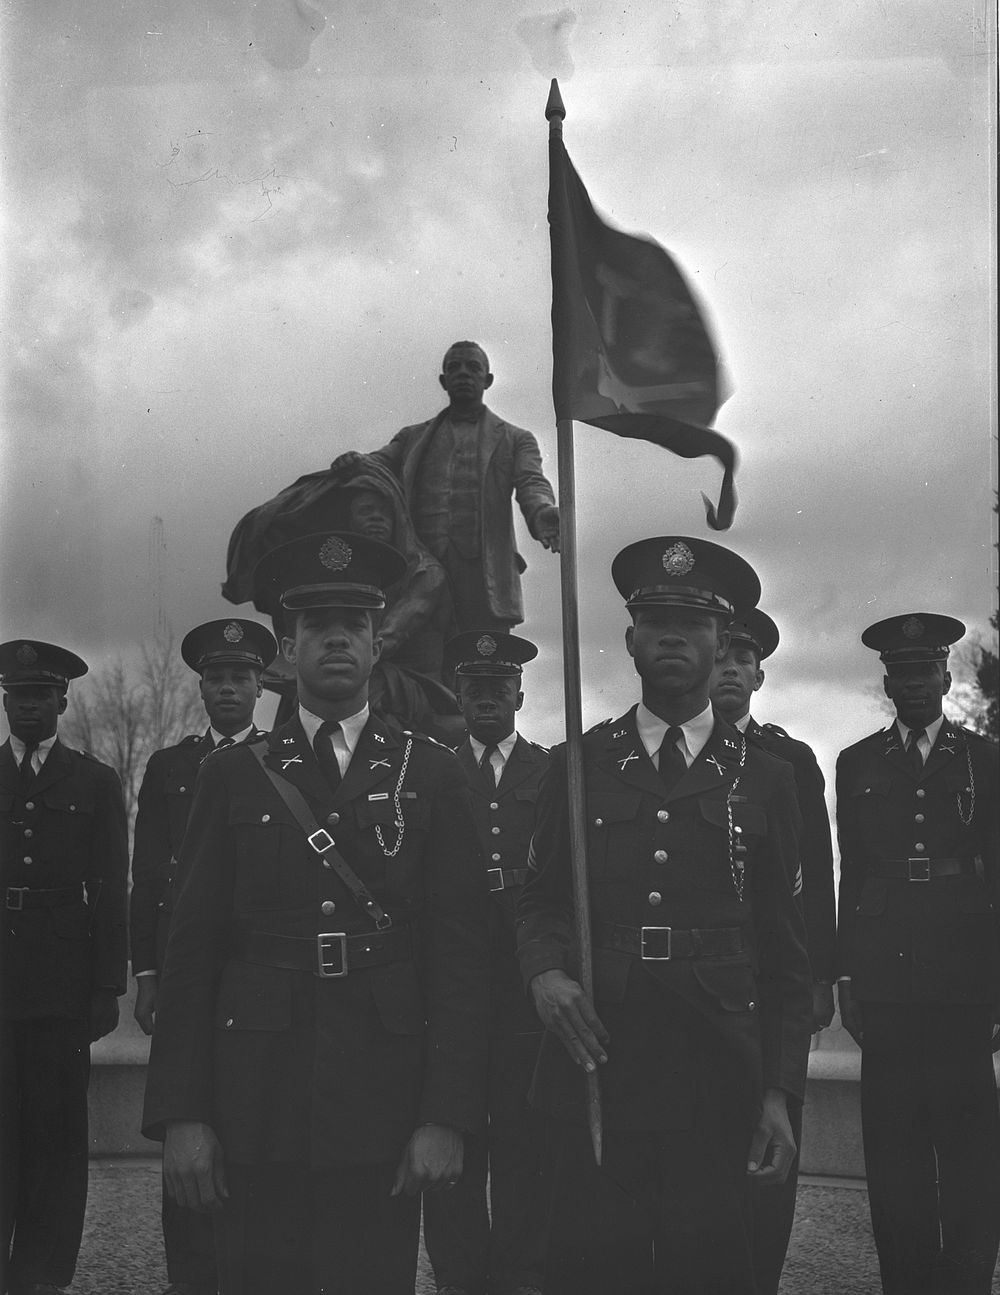 Tuskegee Institute, Alabama. Reserve Officers Training Corps. Sourced from the Library of Congress.